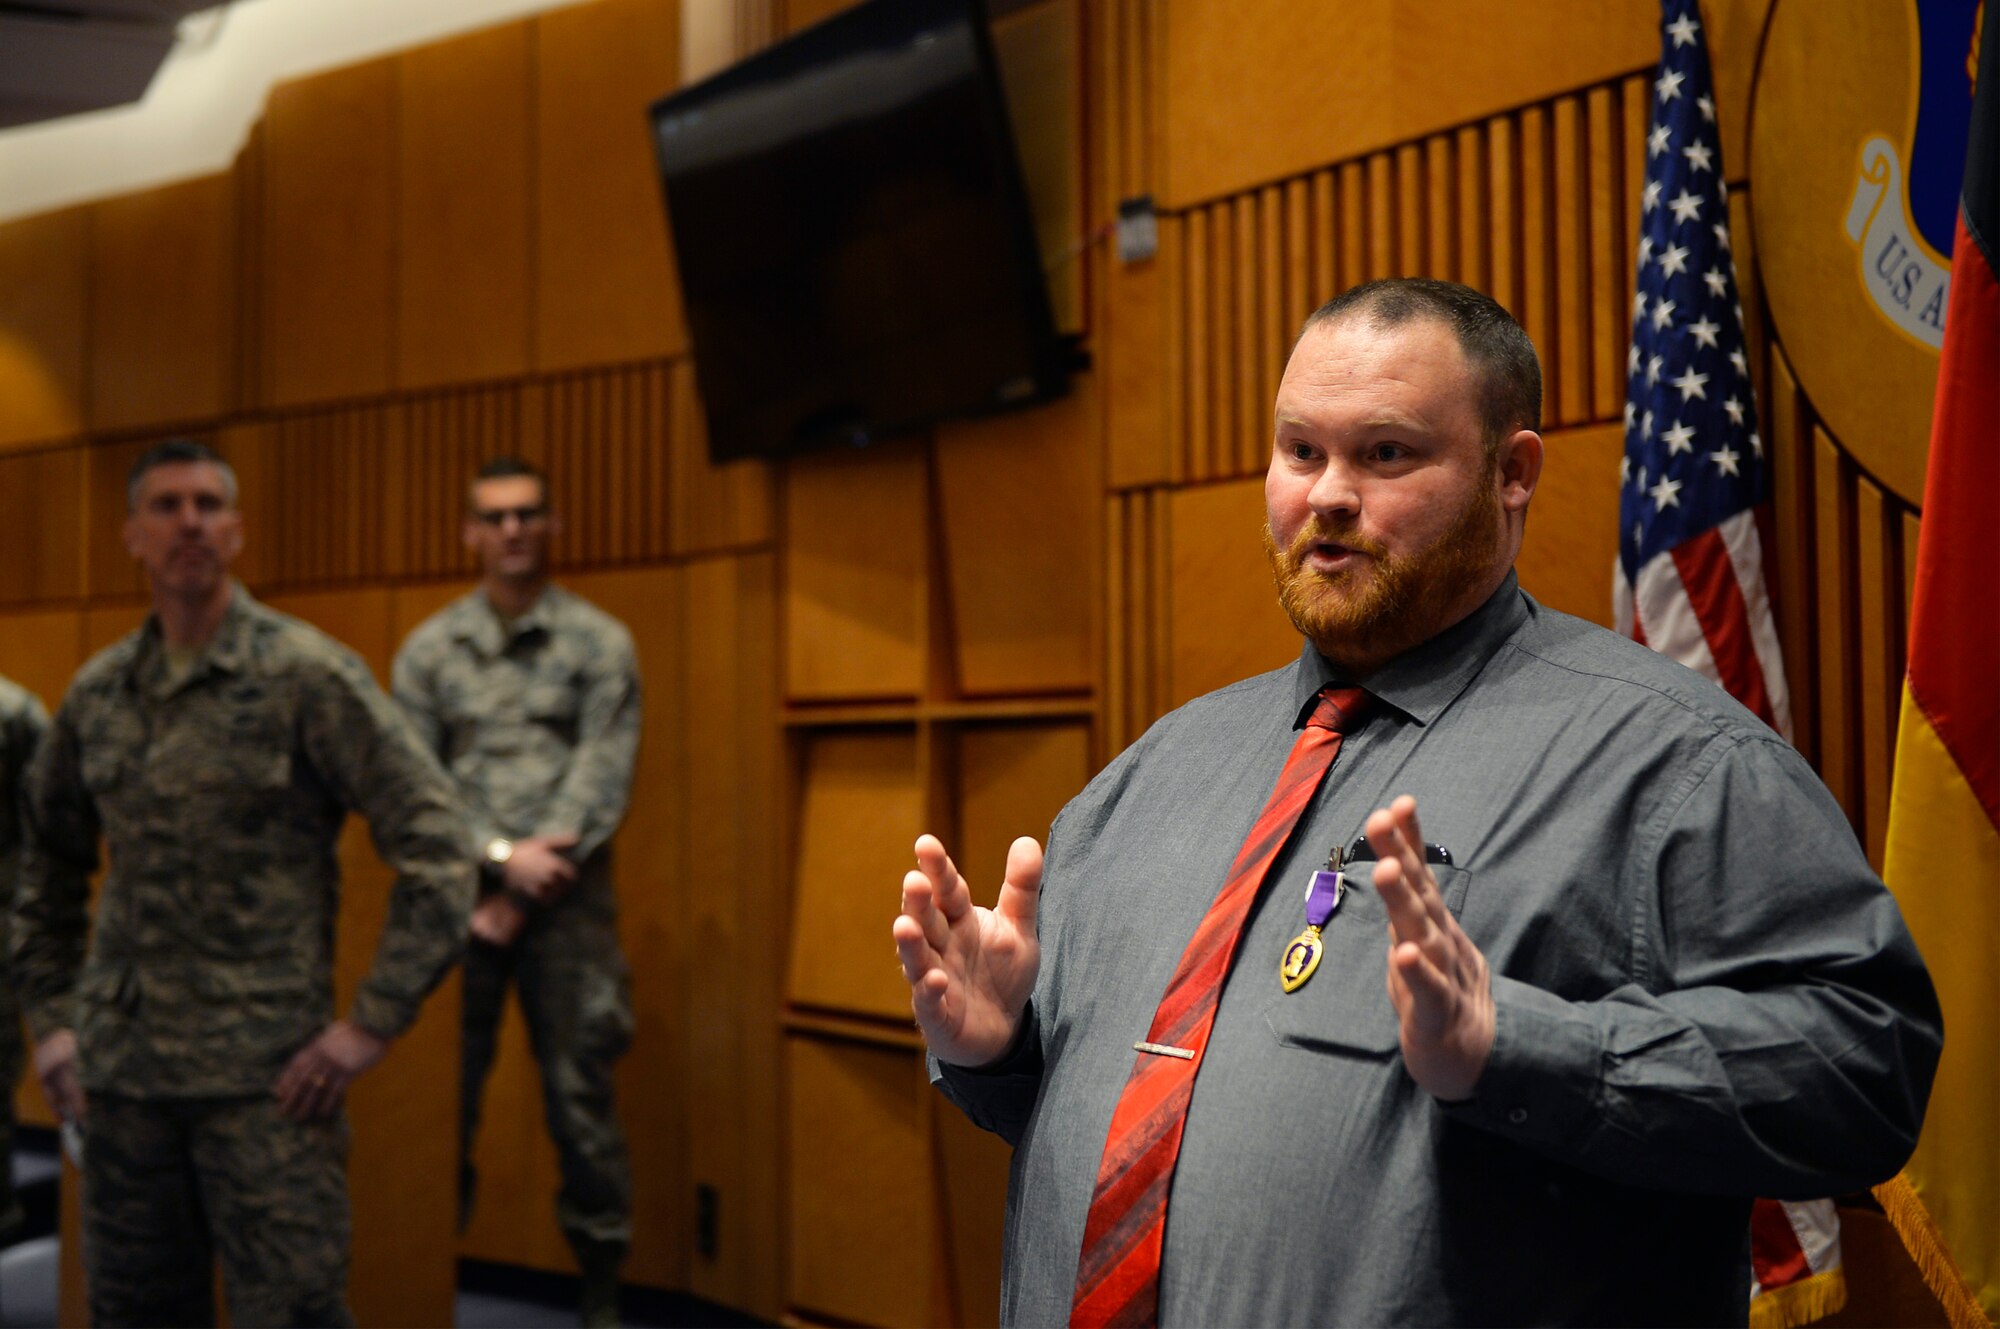 Judson Rackley, U.S. Air Forces in Europe-Air Forces Africa video operations center communications engineer, gives remarks after receiving the Purple Heart on Ramstein Air Base, Germany, Feb. 27, 2018. Rackley received the decoration for wounds he received in combat as a U.S. Army Soldier in Afghanistan in 2010. (U.S. Air Force photo by Senior Airman Joshua Magbanua)